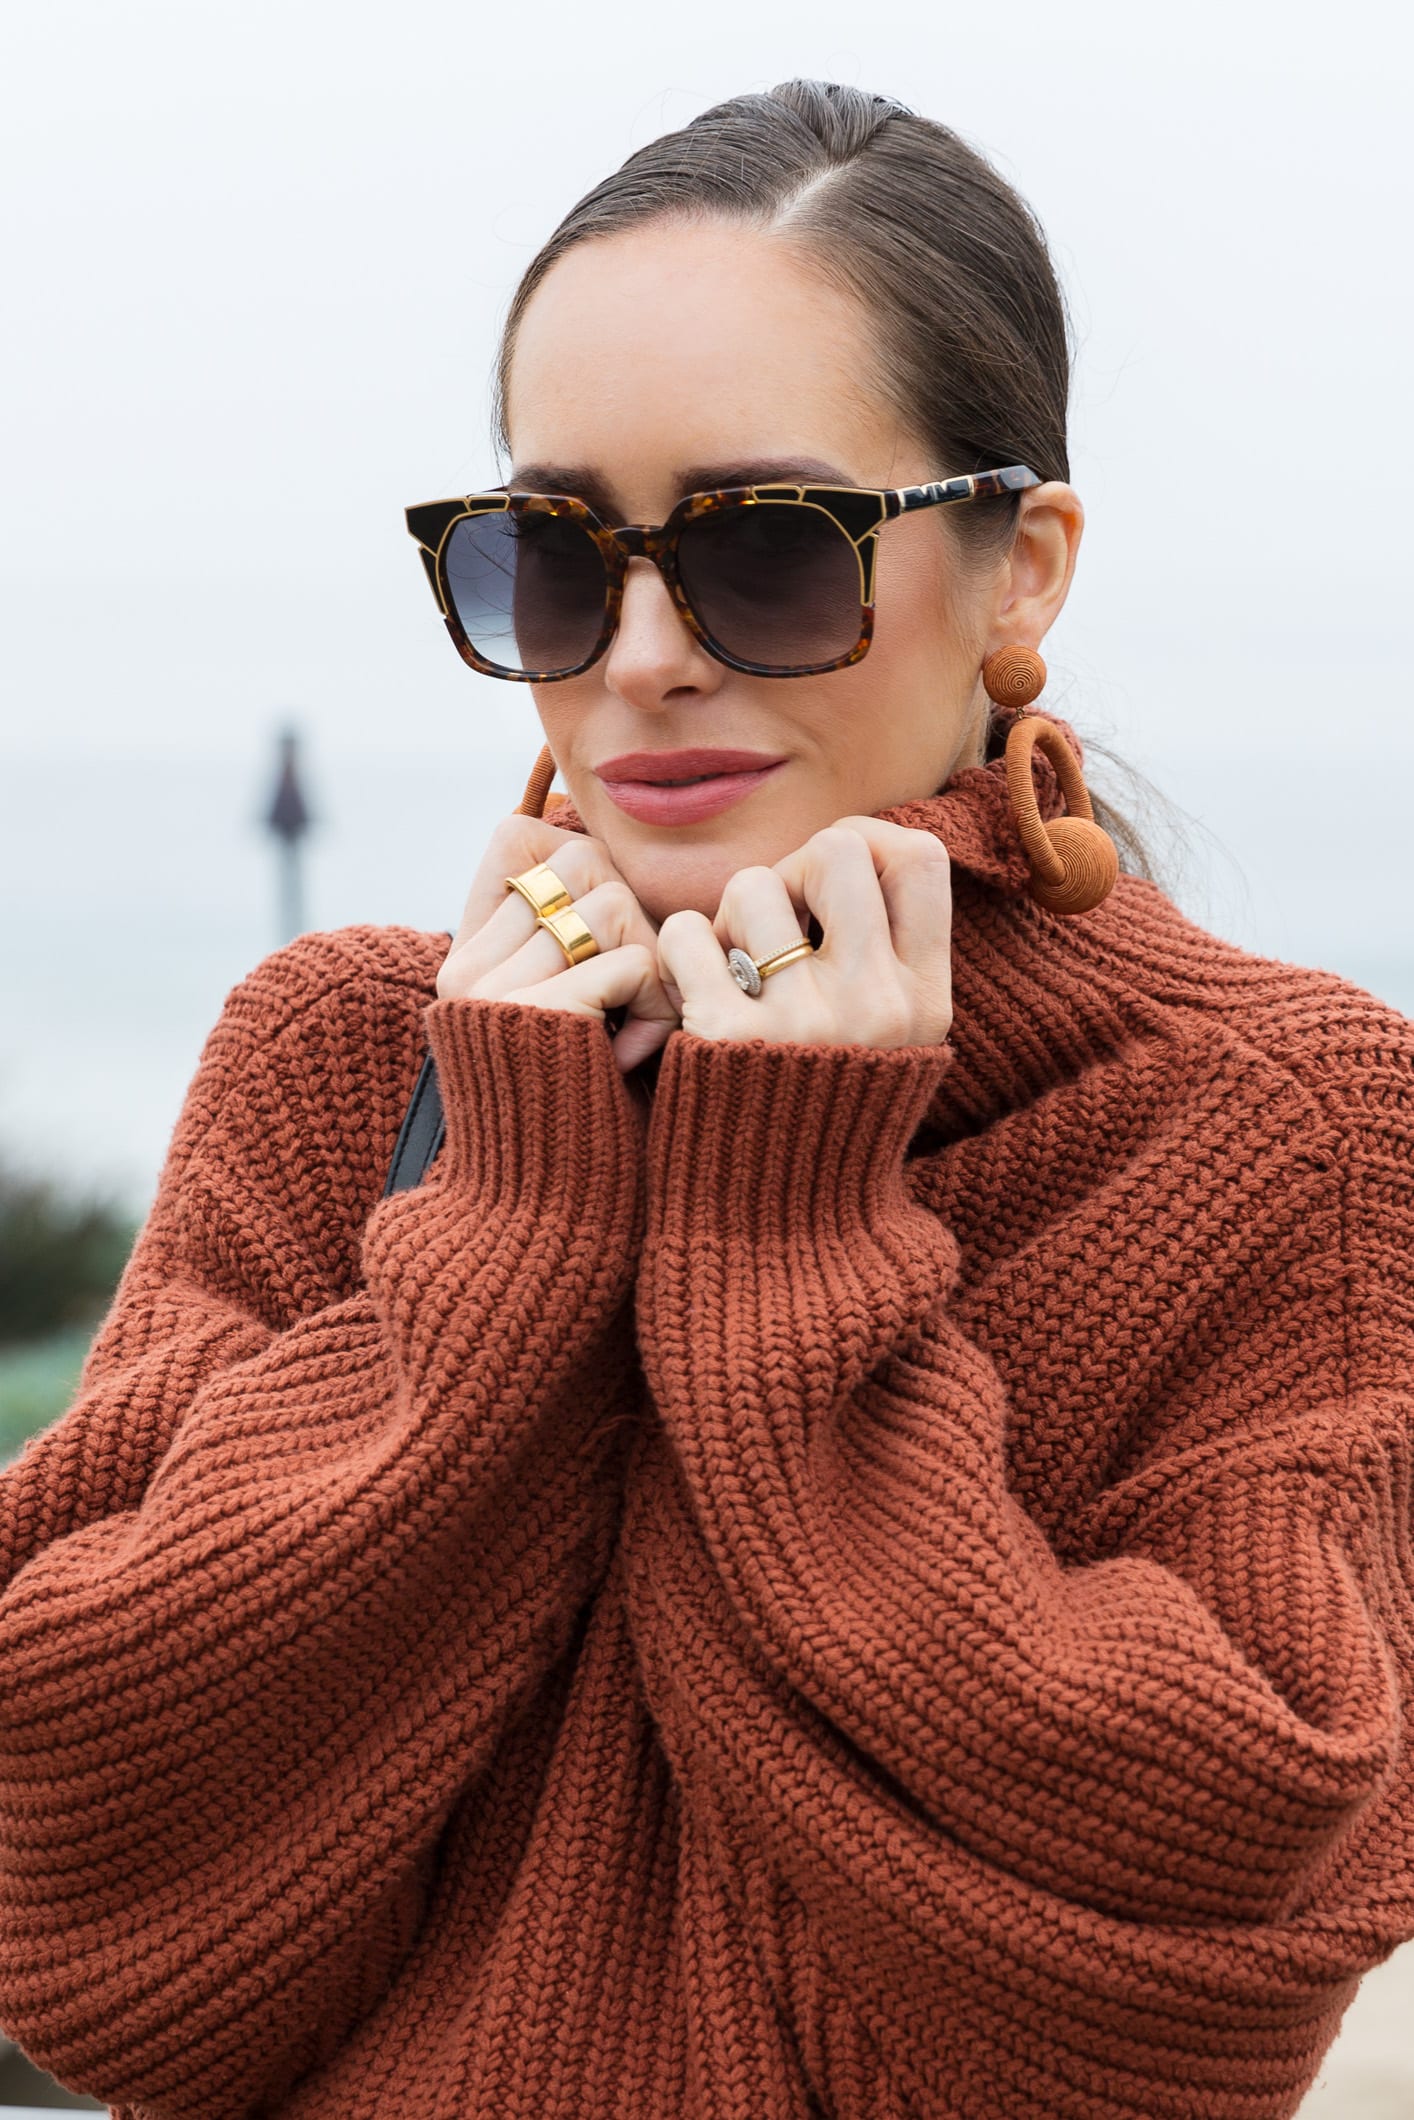 Louise Roe Talks About Self Love Wearing Free People Turtleneck Madewell Jeans Rebecca De Ravenel Earrings and Embroidered Clutch